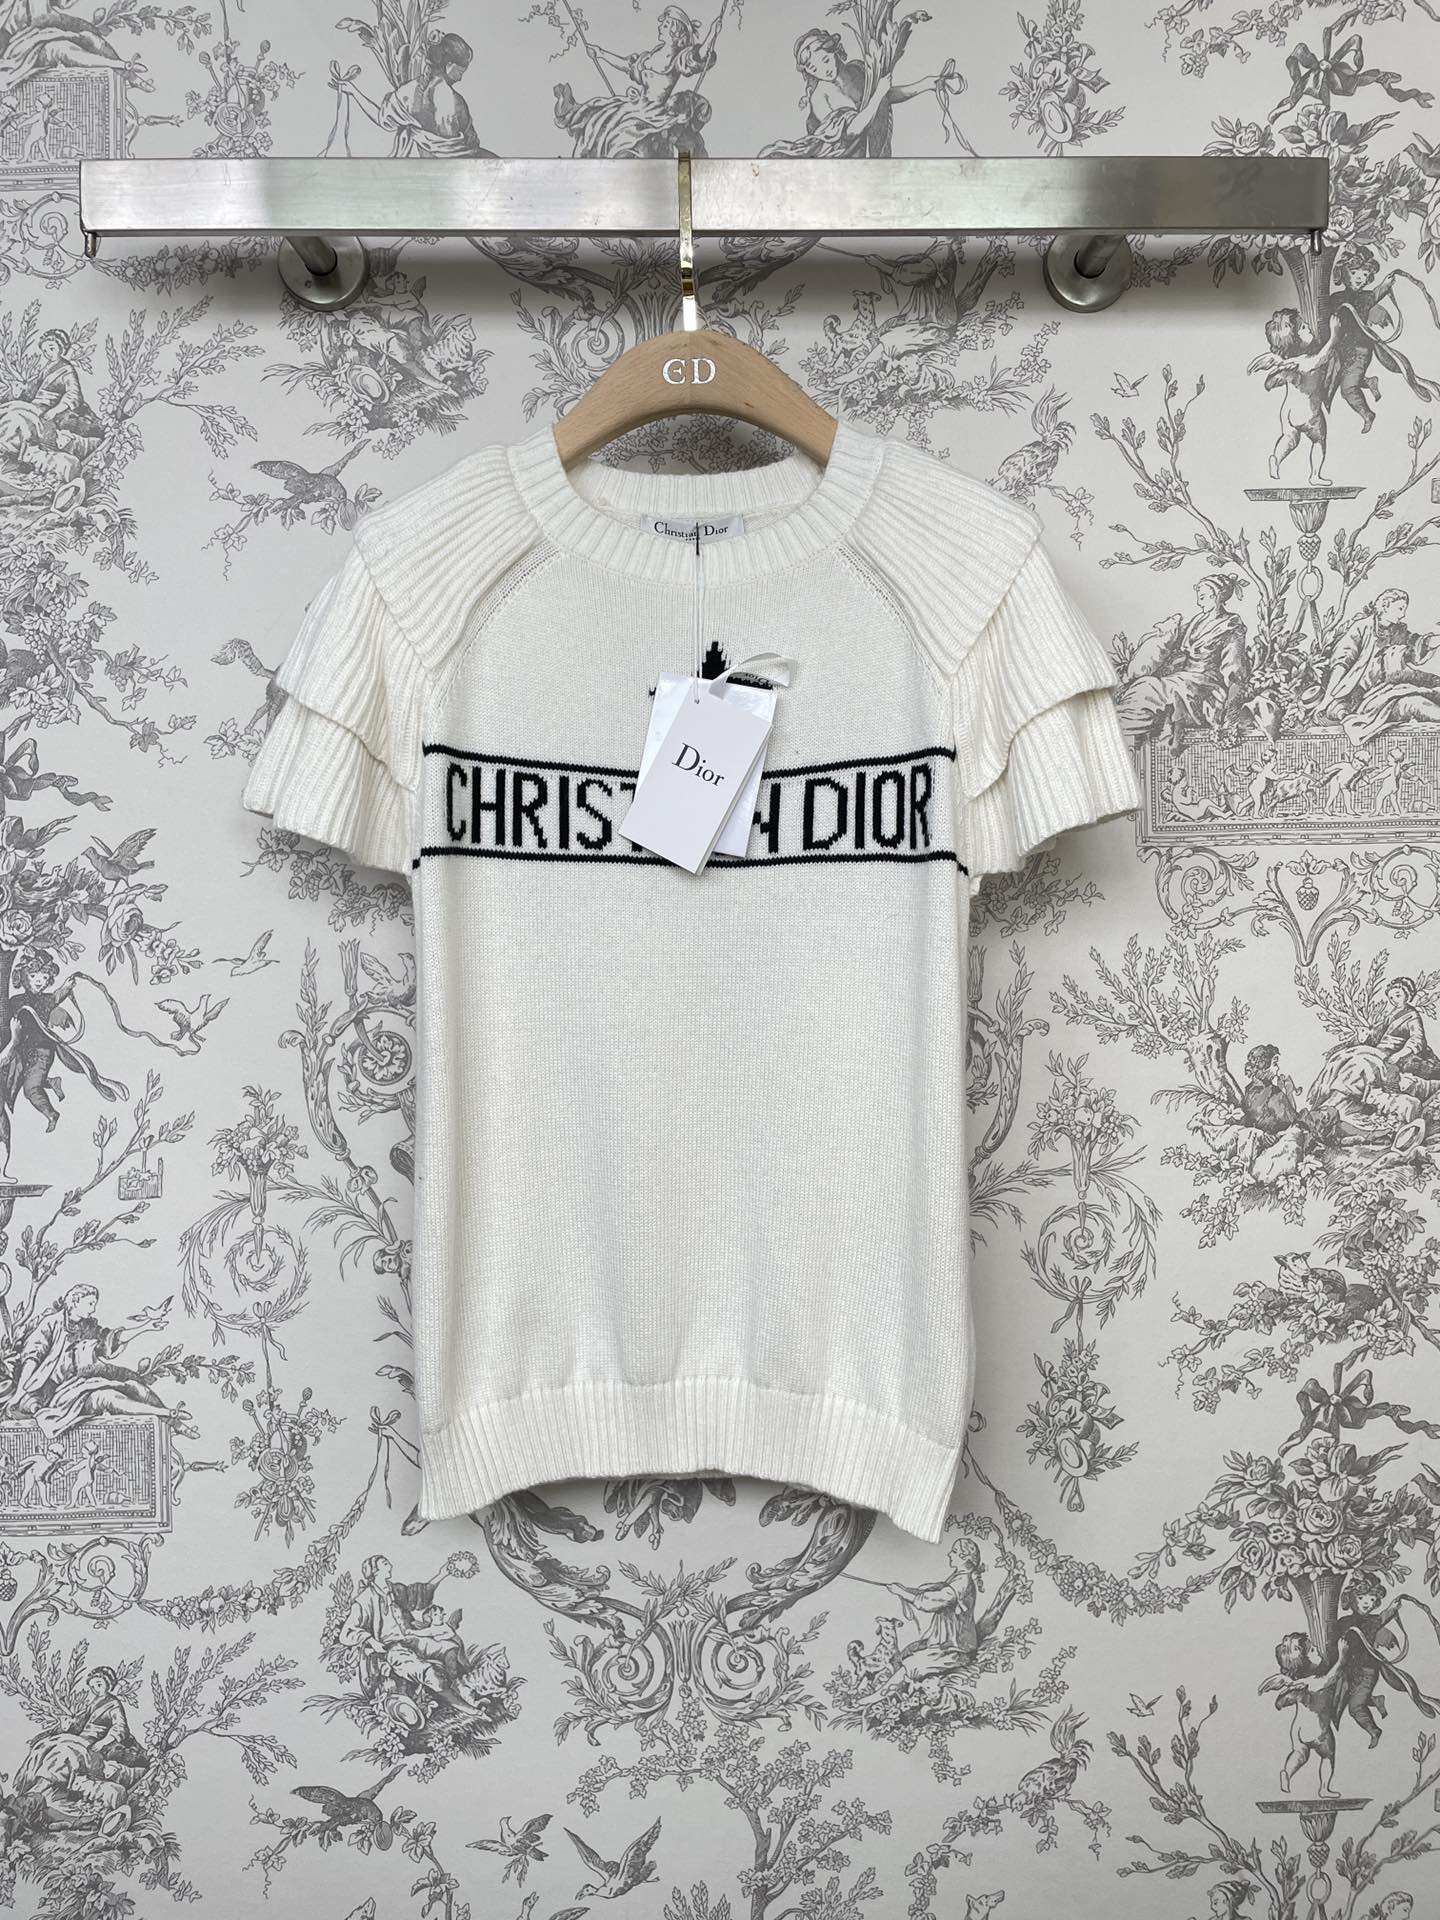 AAAA Customize
 Dior Clothing Sweatshirts Black White Cashmere Fall Collection